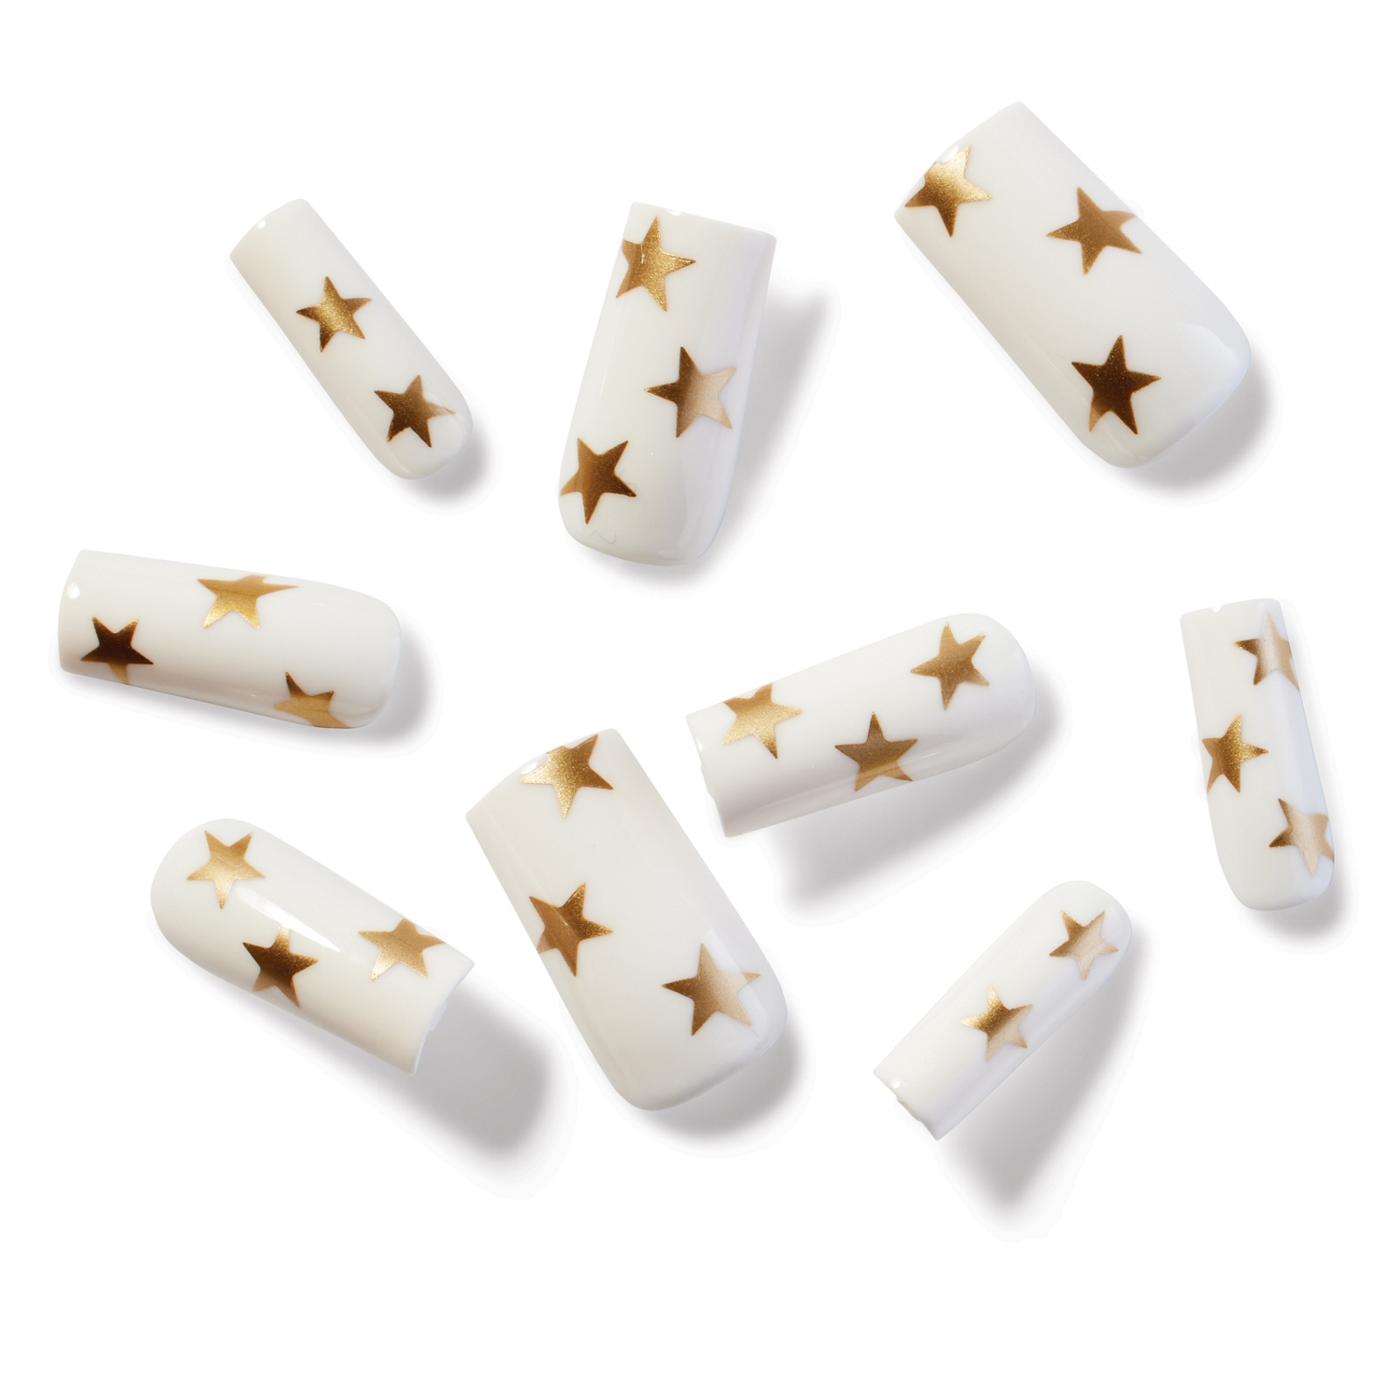 Diosa Thora's Astrology Reading Artificial Nails - Gold Stars; image 2 of 6